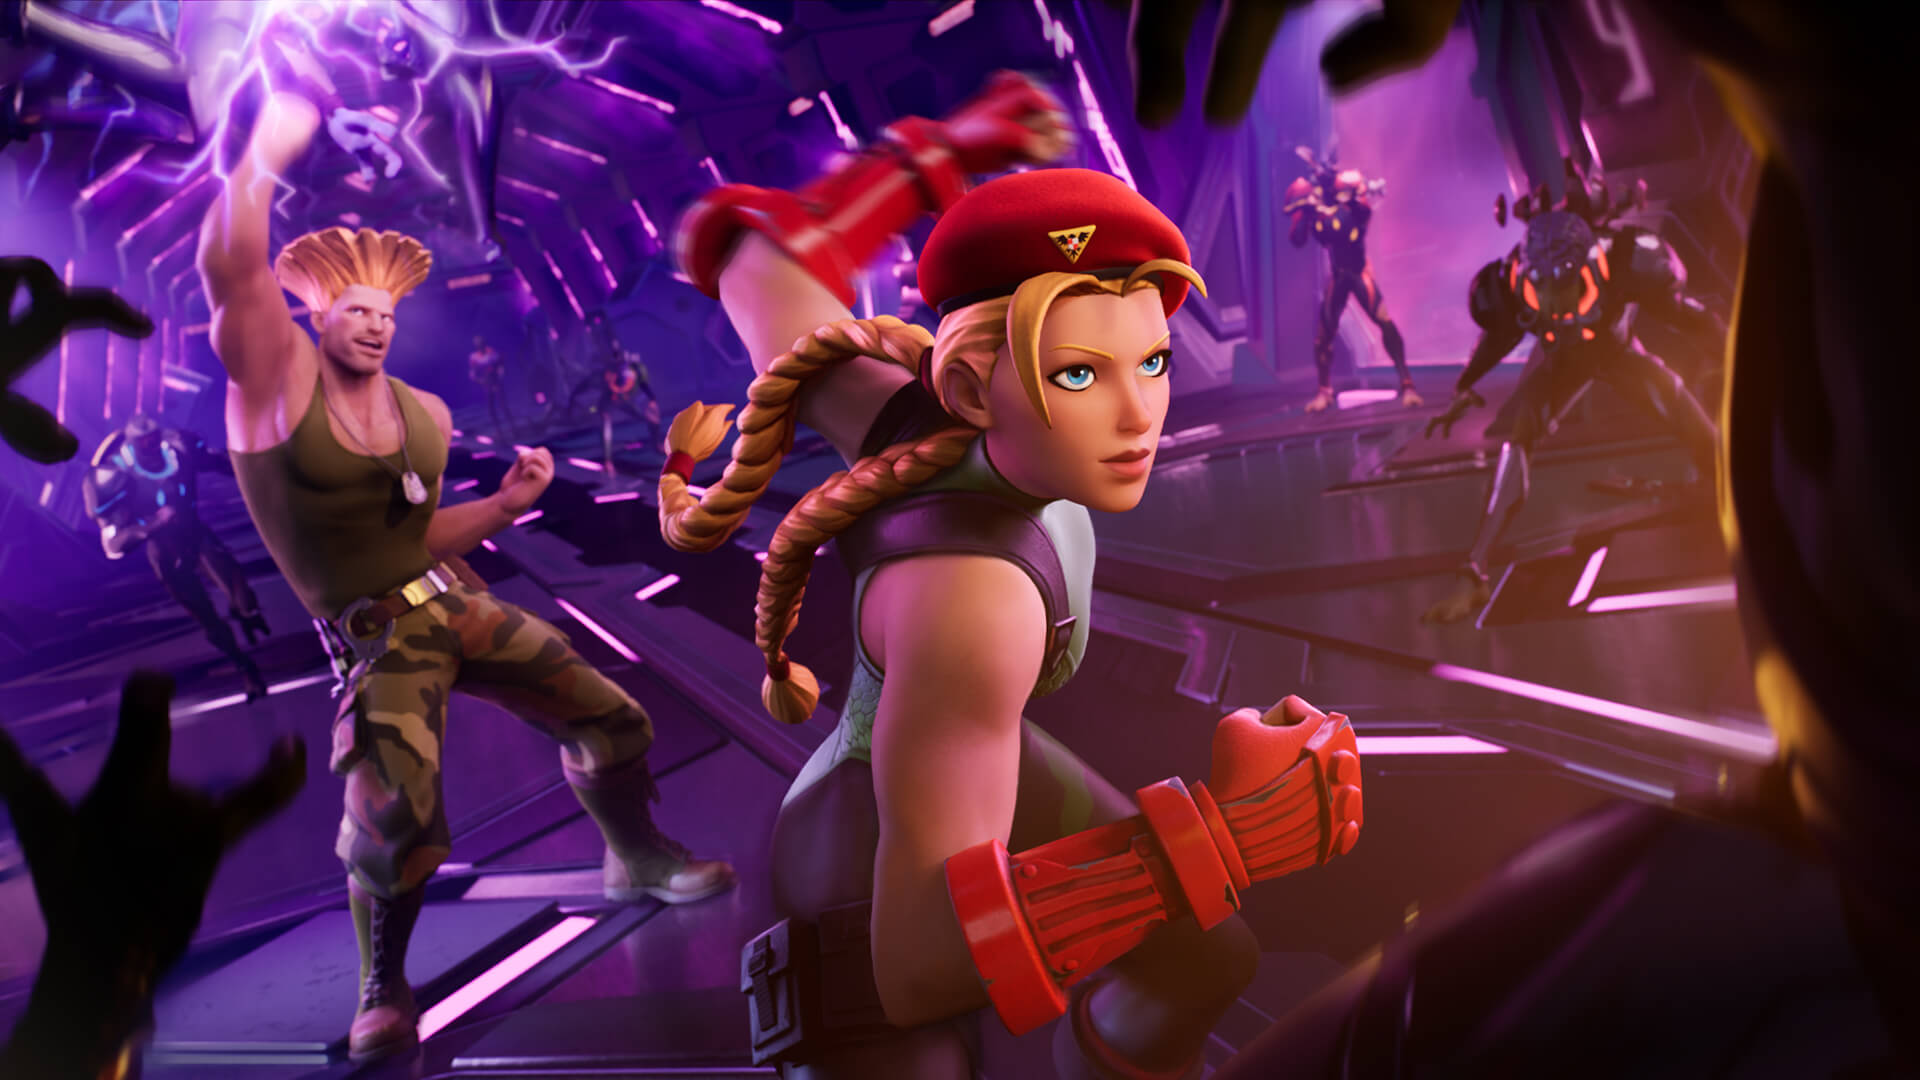 Fortnite X Street Fighter: Latest Collaboration Introduces Guile Outfit and  Cammy Cup - EssentiallySports